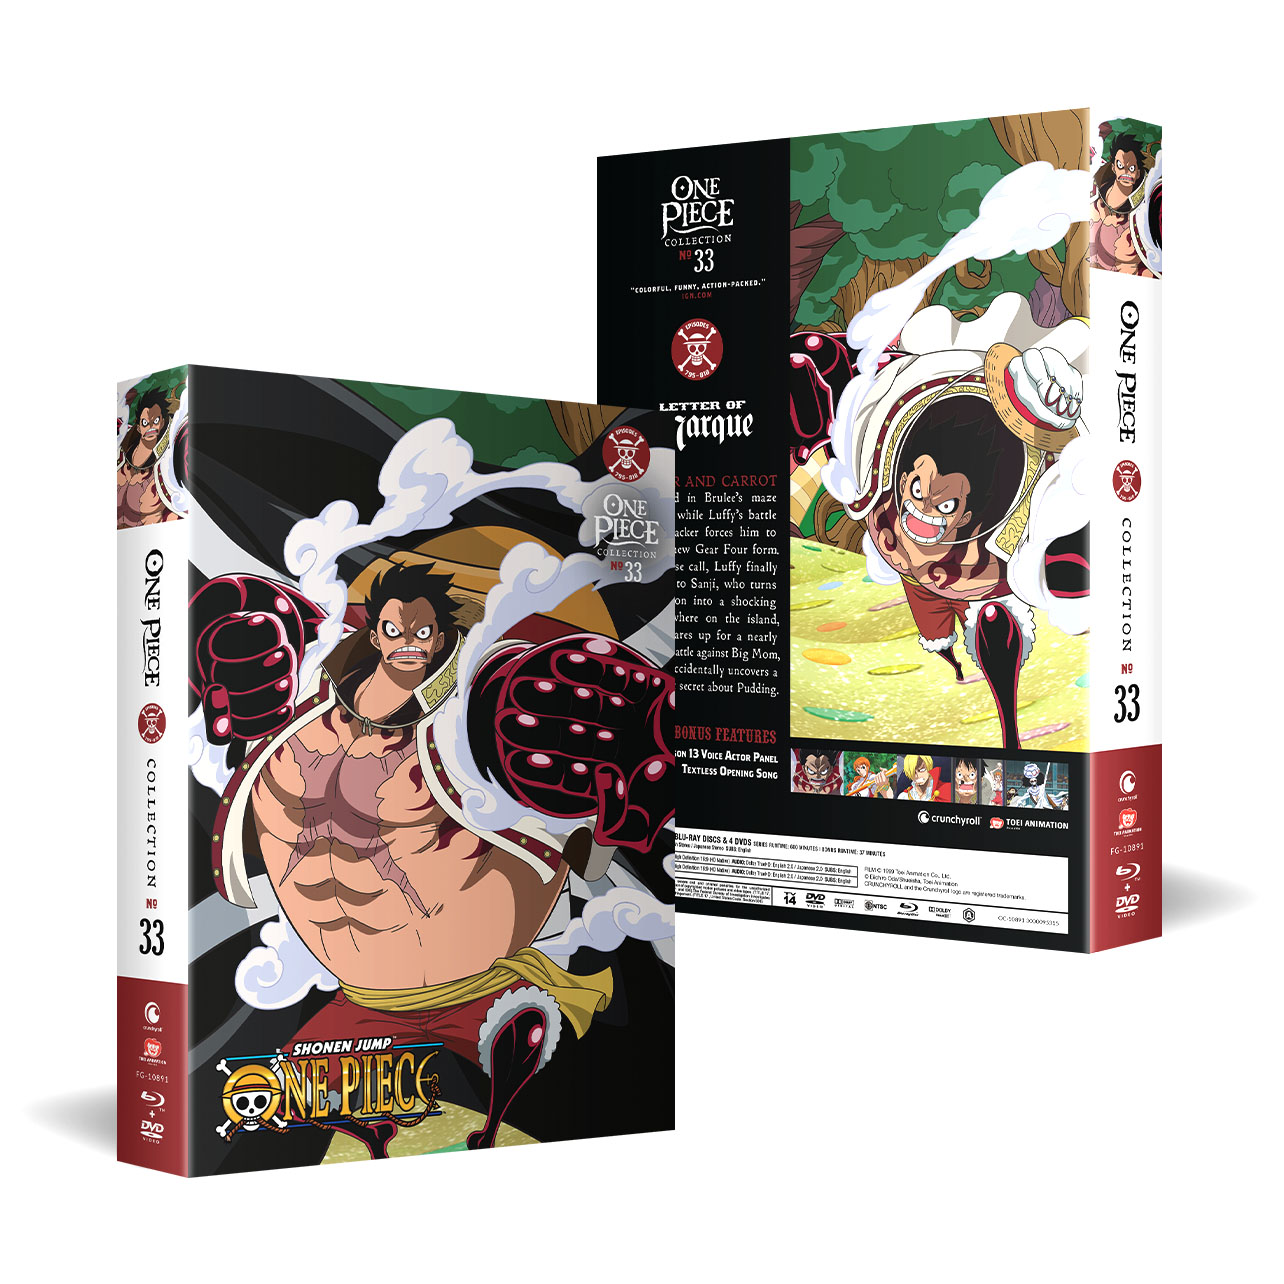 One Piece Collection 33 Blu-ray Release Date & Special Features